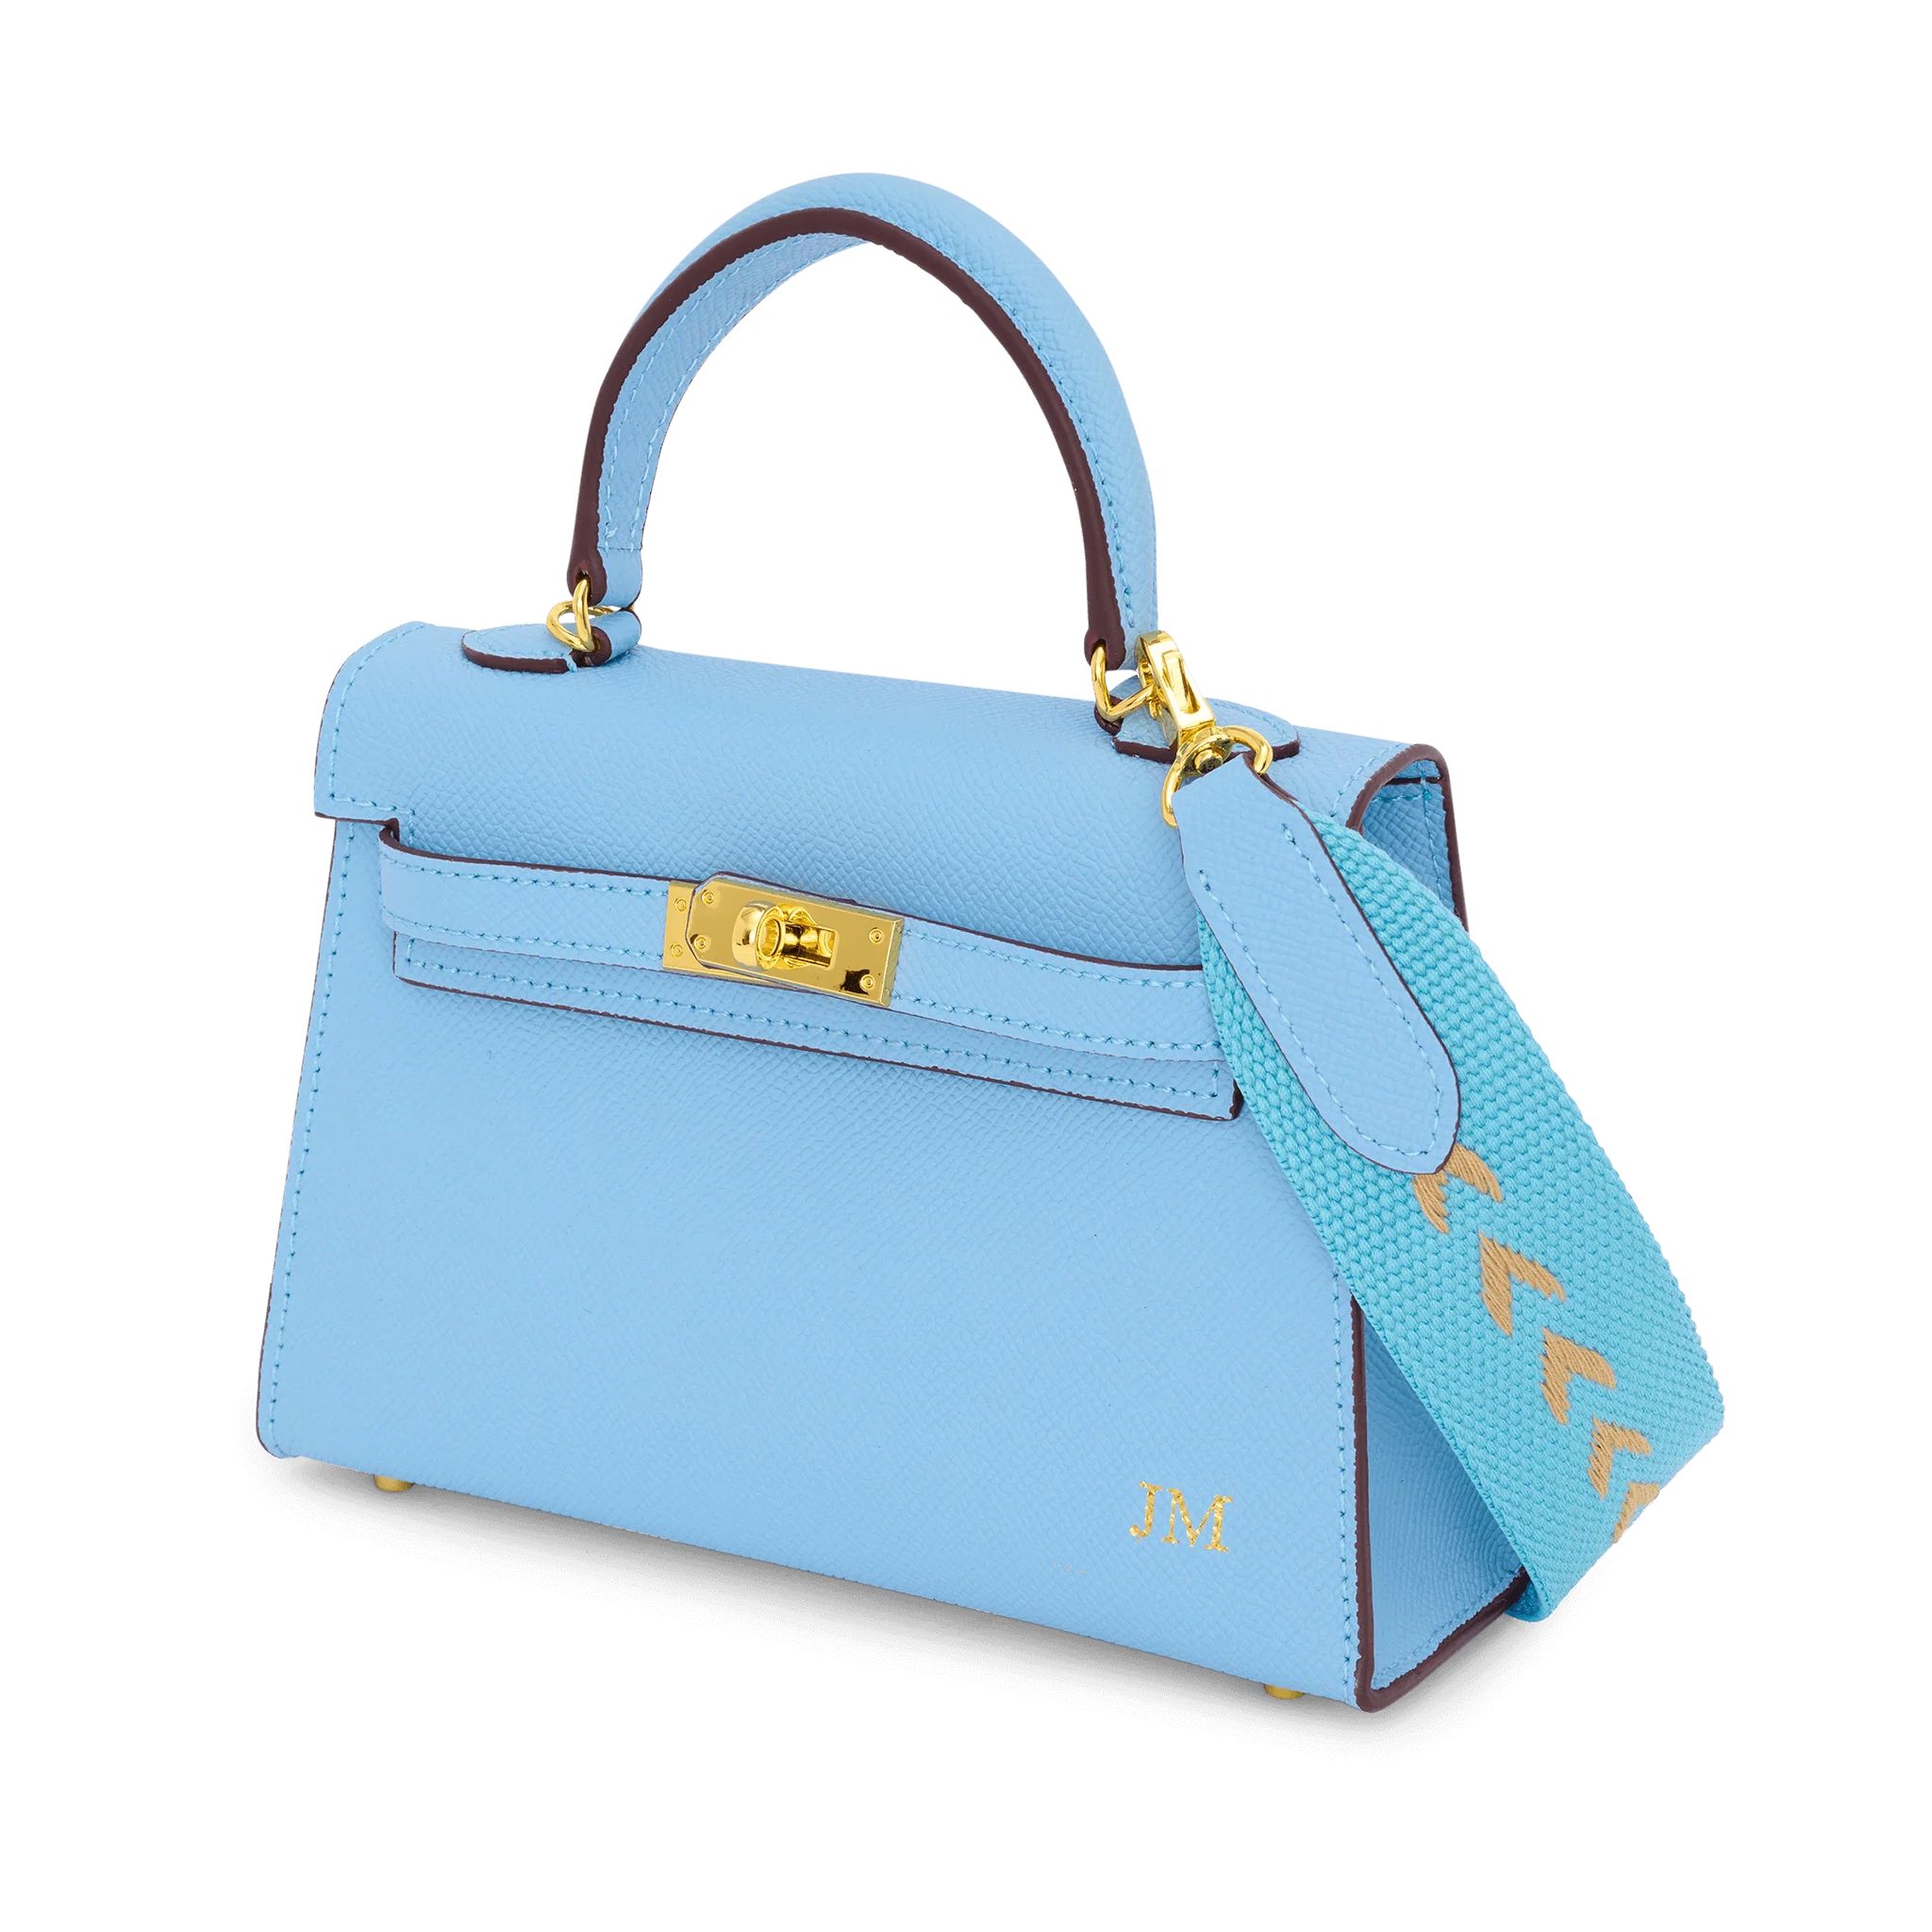 Lily & Bean Hettie Mini Bag -  Glacier Blue with Initials & Fabric Strap | Lily and Bean